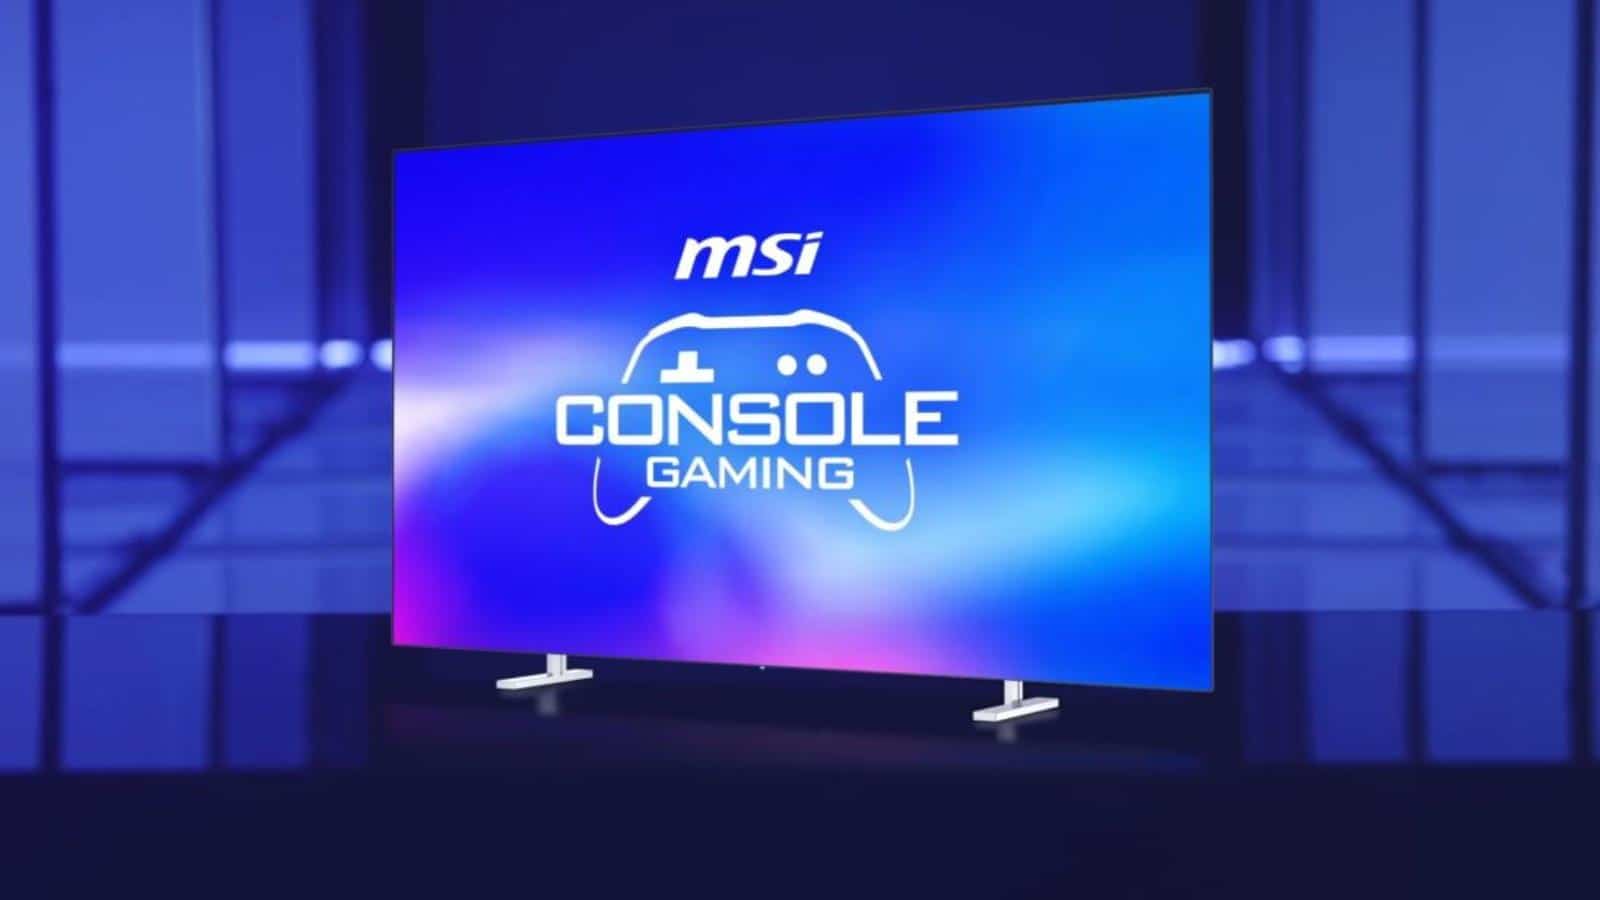 Unique monitor from MSI.  Mini LED, Quantum Dots and DisplayHDR 1000 on board